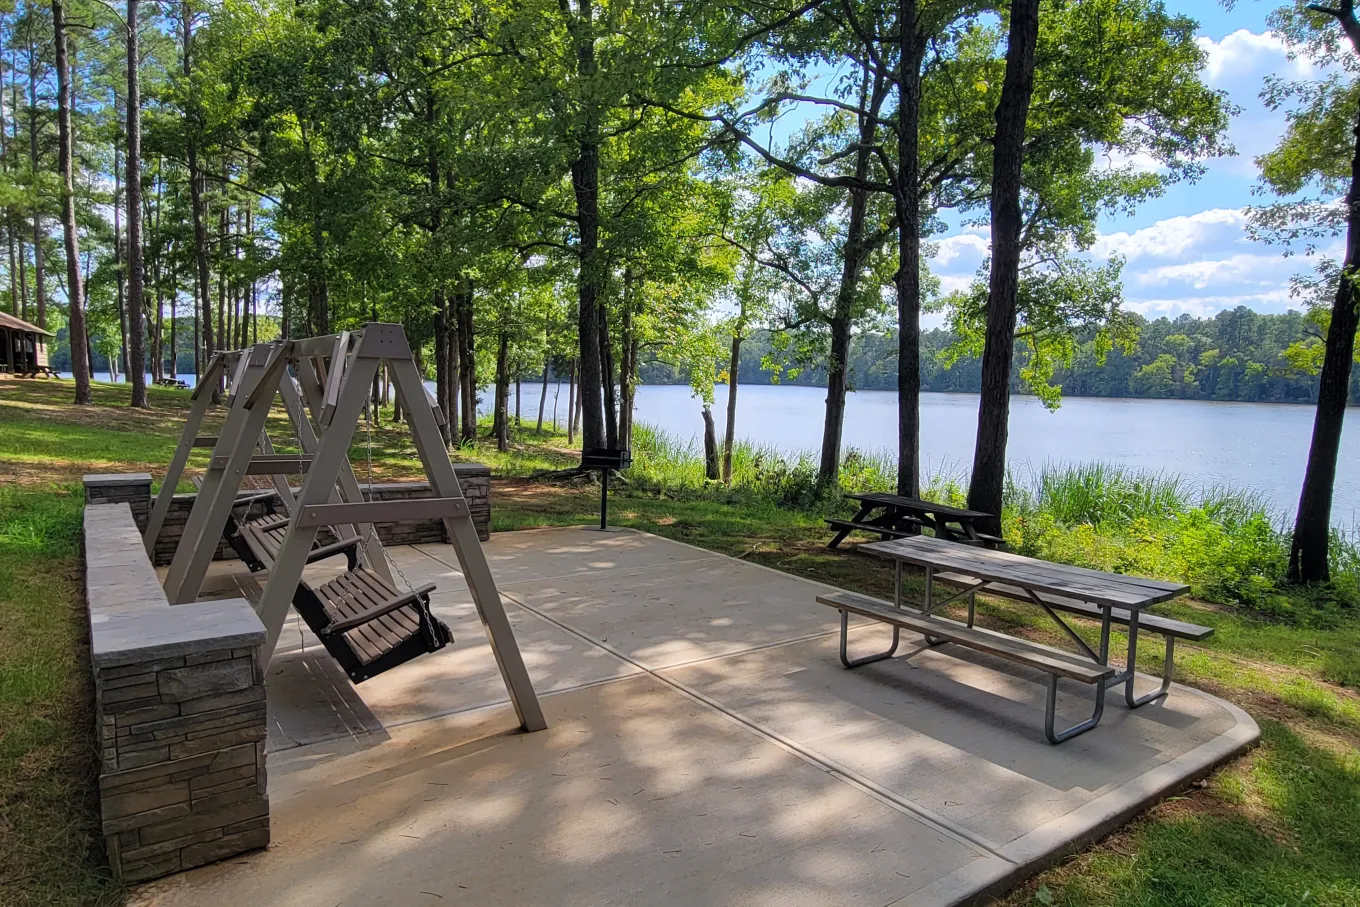 Swing benches with a lakeview